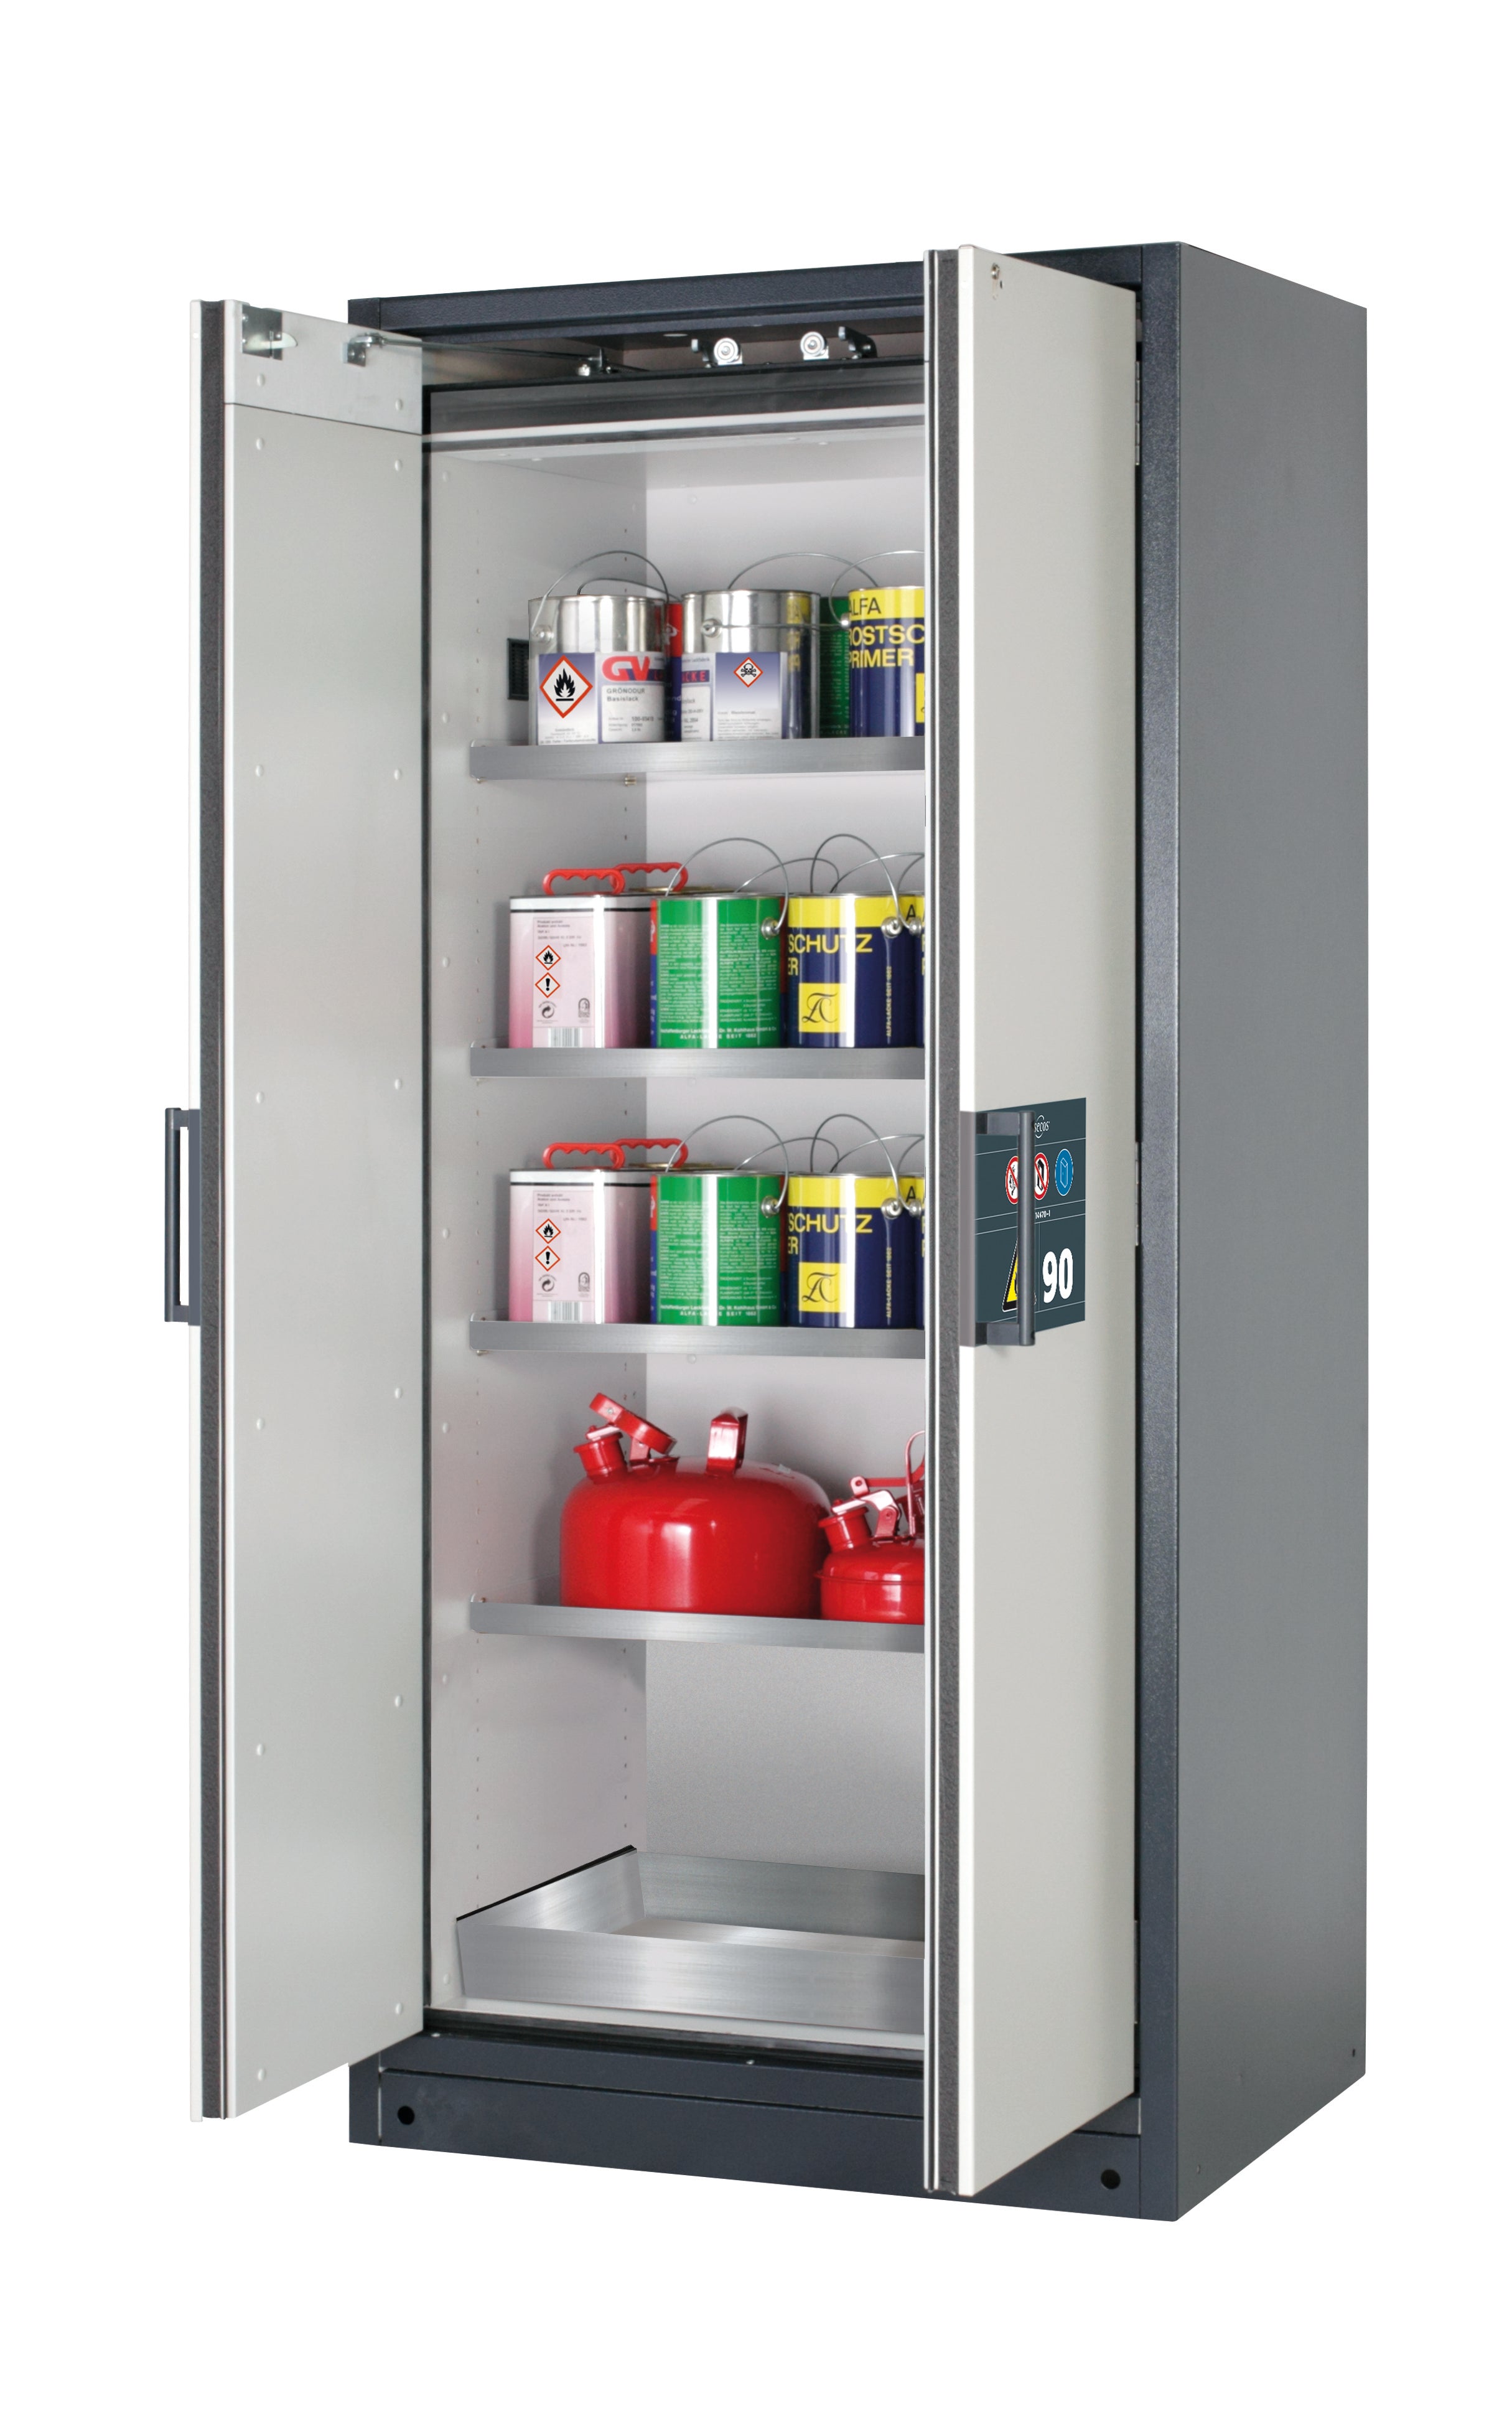 Type 90 safety storage cabinet Q-CLASSIC-90 model Q90.195.090 in light grey RAL 7035 with 4x shelf standard (stainless steel 1.4301),